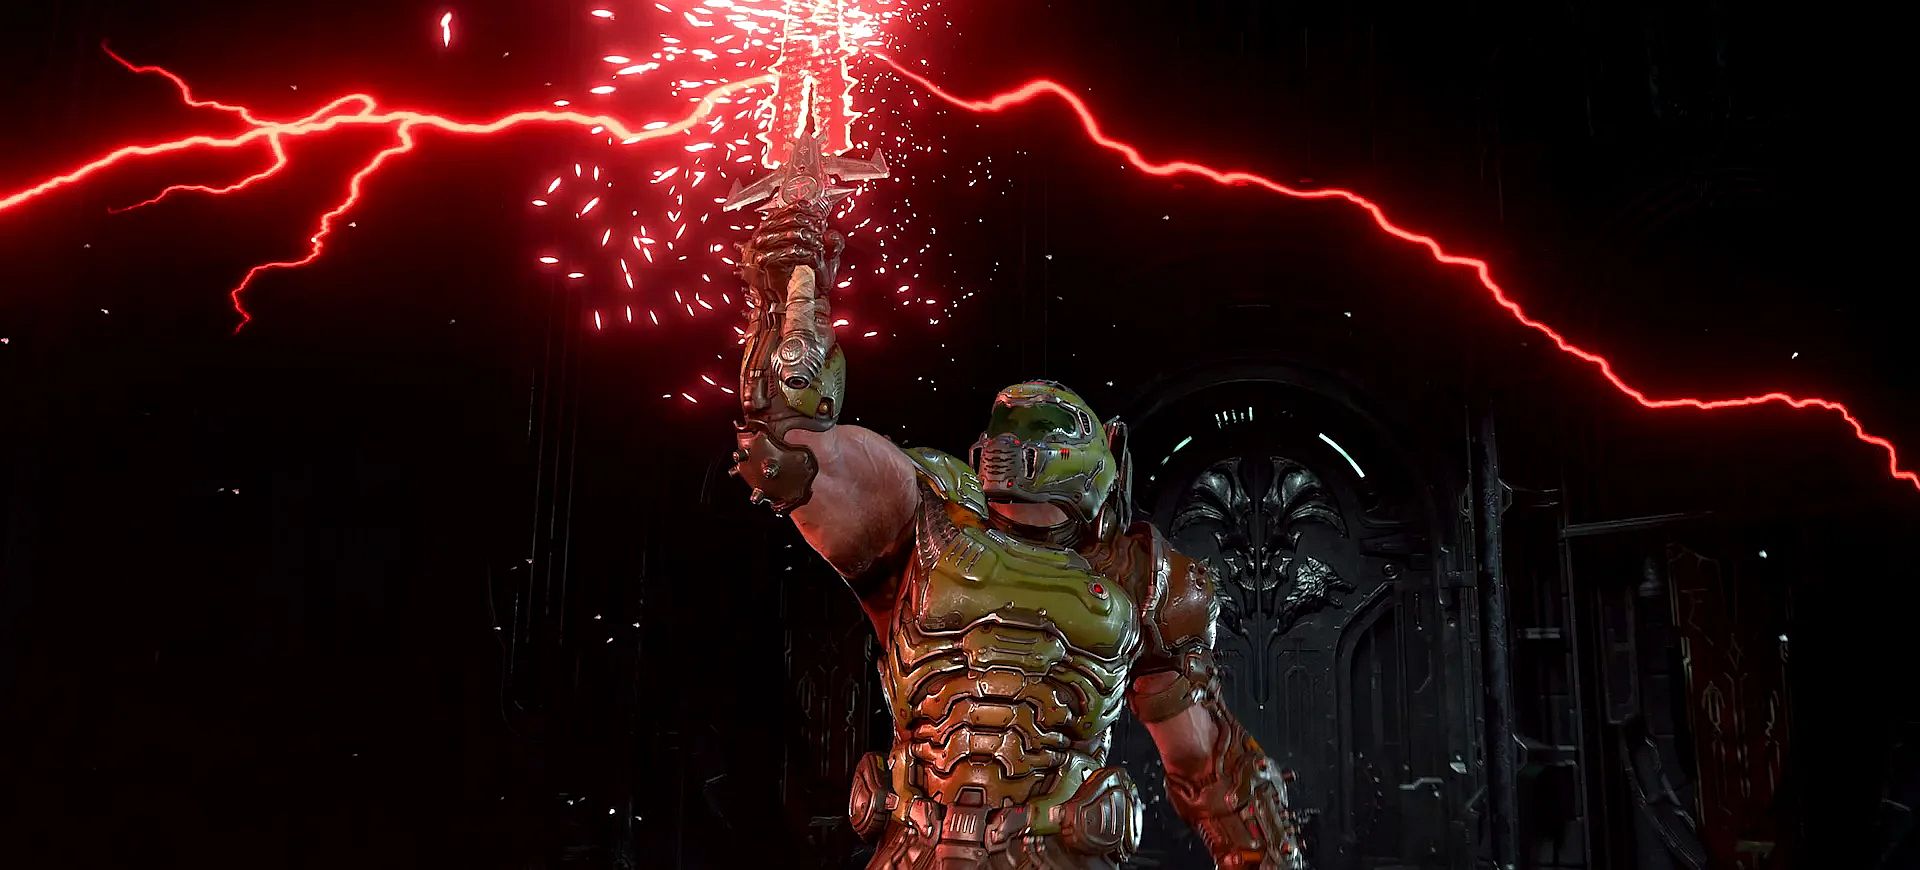 Image for Doom Eternal accidentally ships without Denuvo DRM, making pirates' job easier